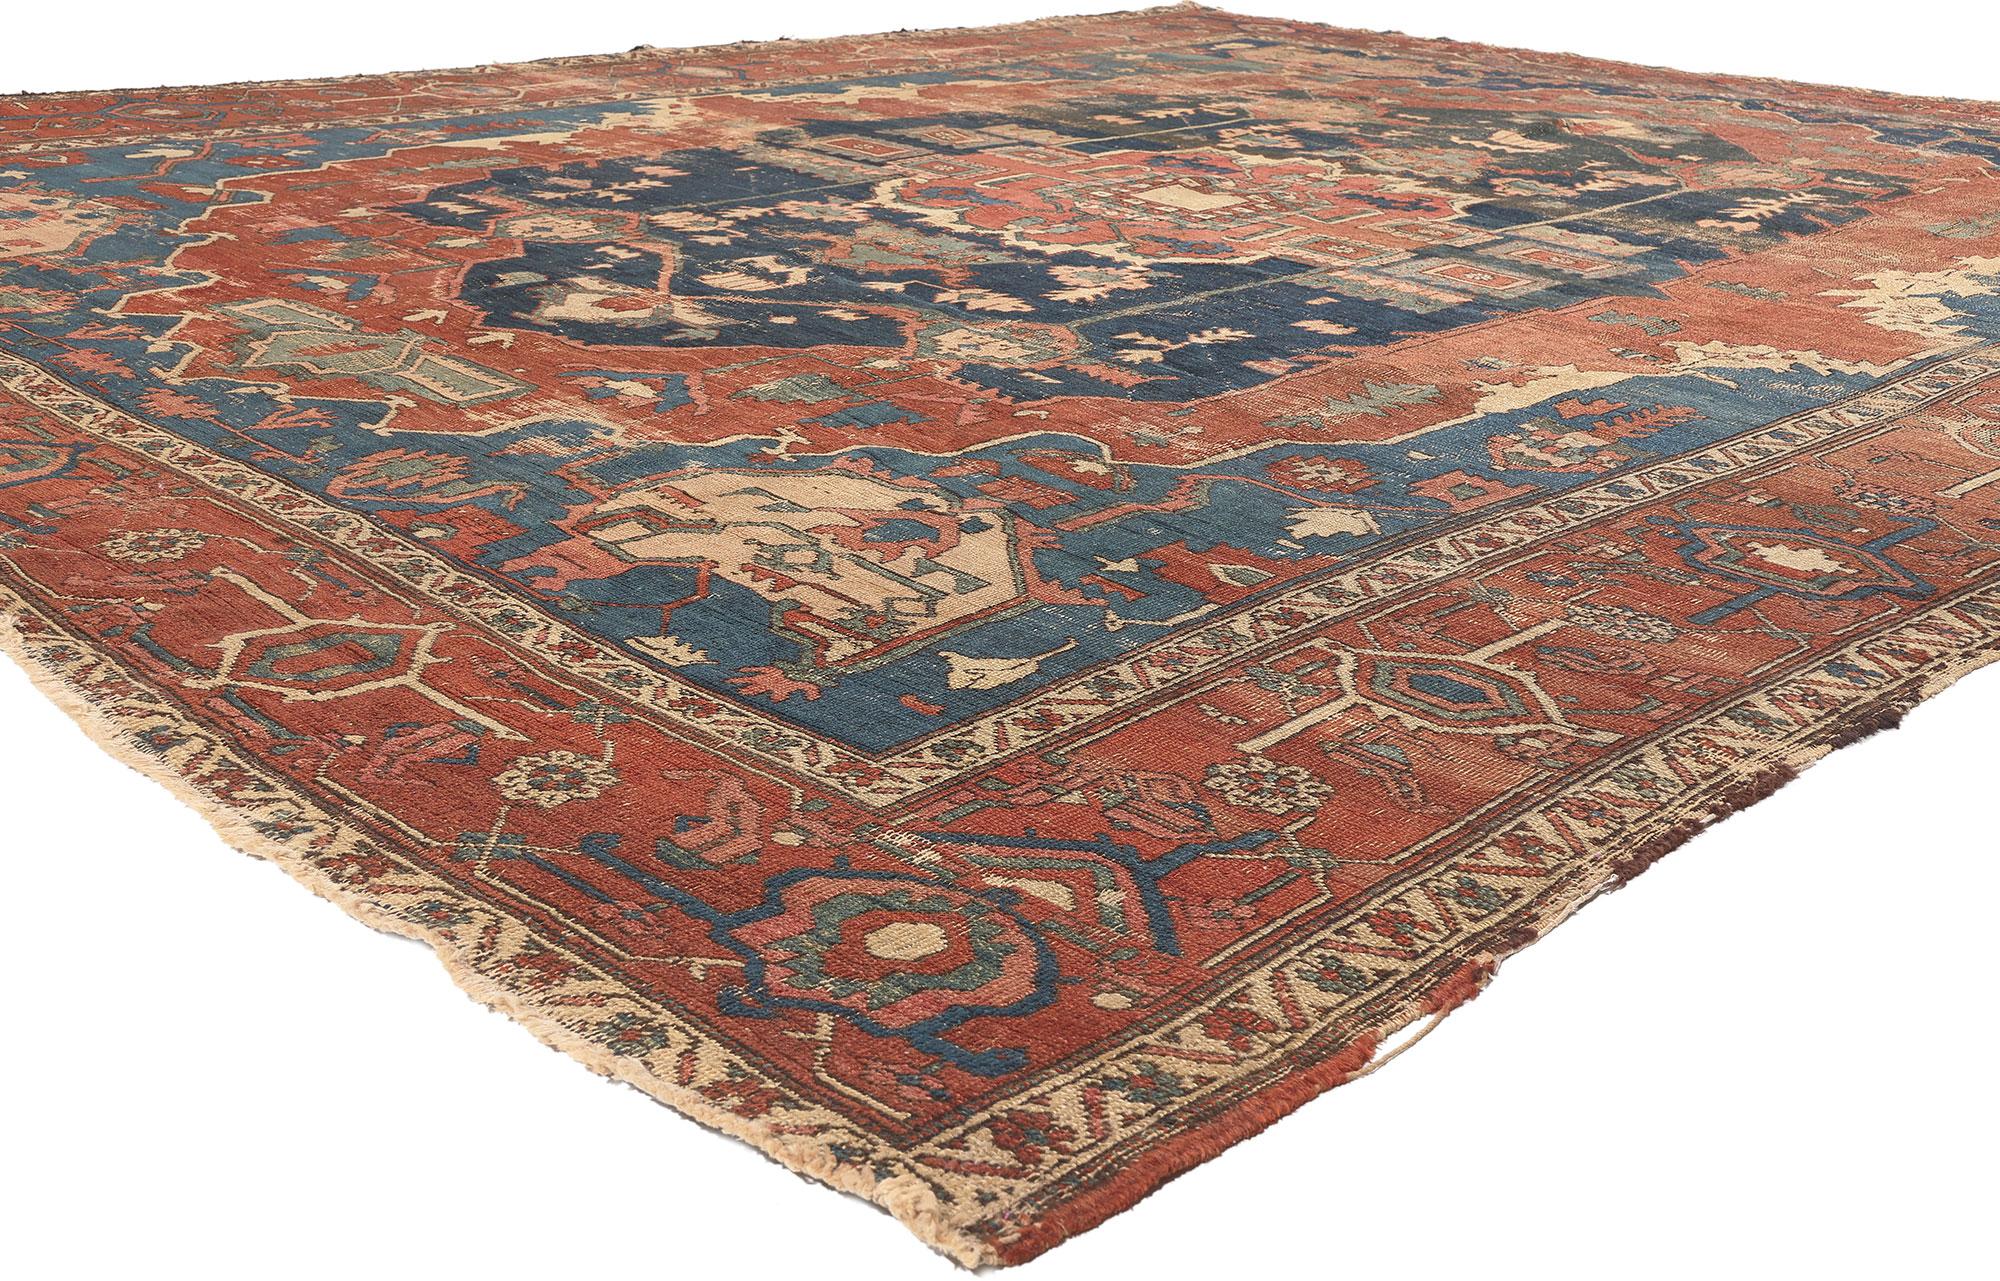 78547 Rustic Antique Persian Serapi Rug, 10'02 x 12'06.
Weathered finesse meets rustic sensibility in this distressed antique Persian Serapi rug. The faded geometric design and earthy colorway woven into this piece work together creating a curated